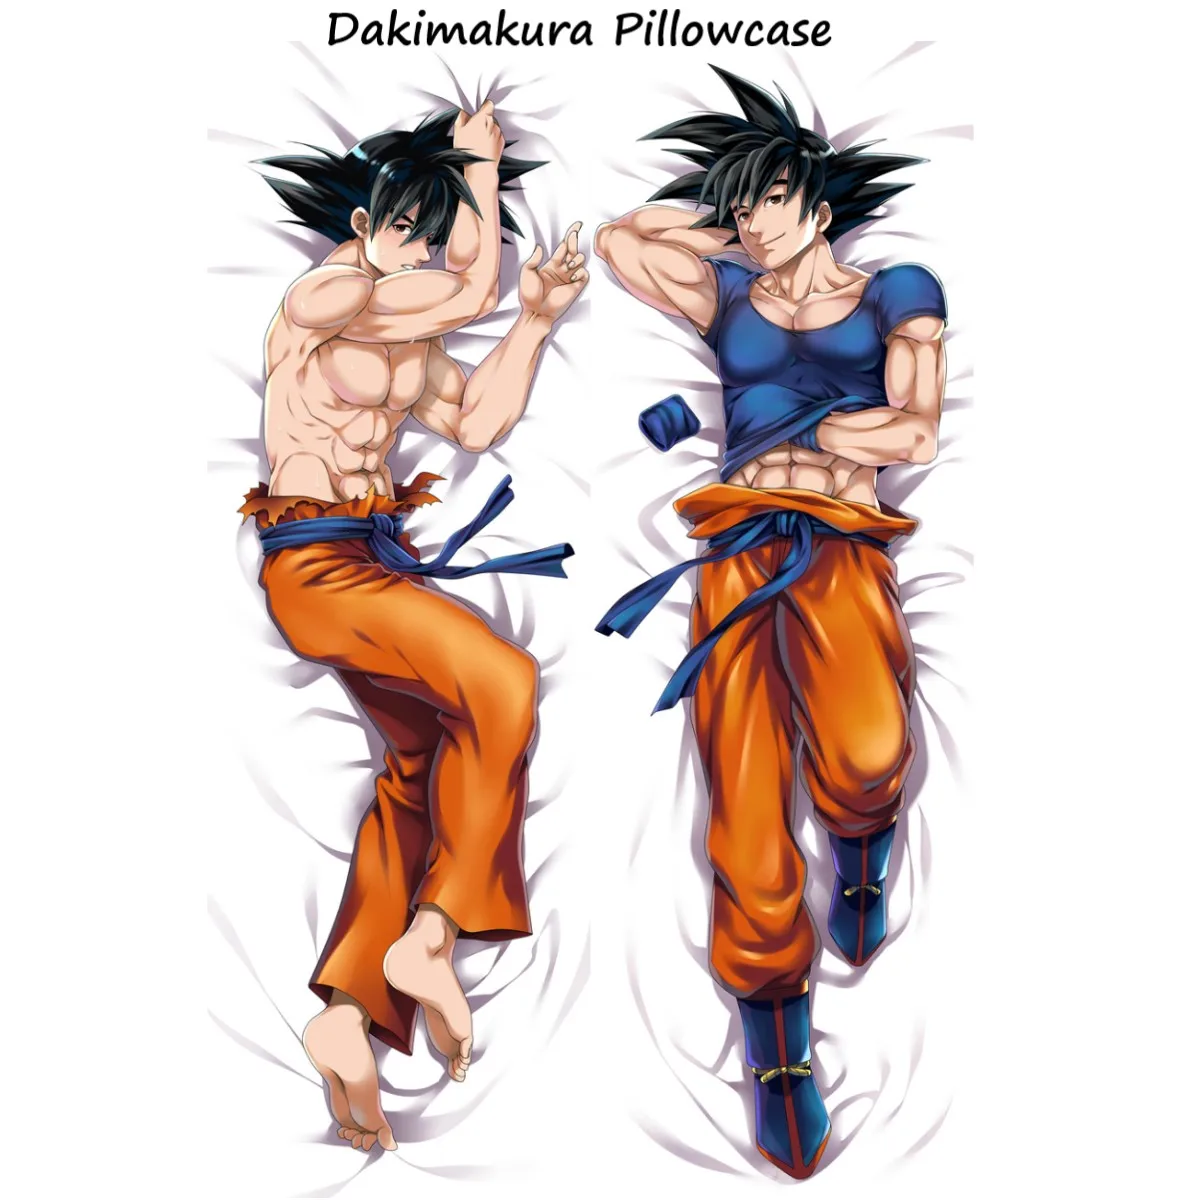 dorothy dahms recommends bulma body pillow case pic